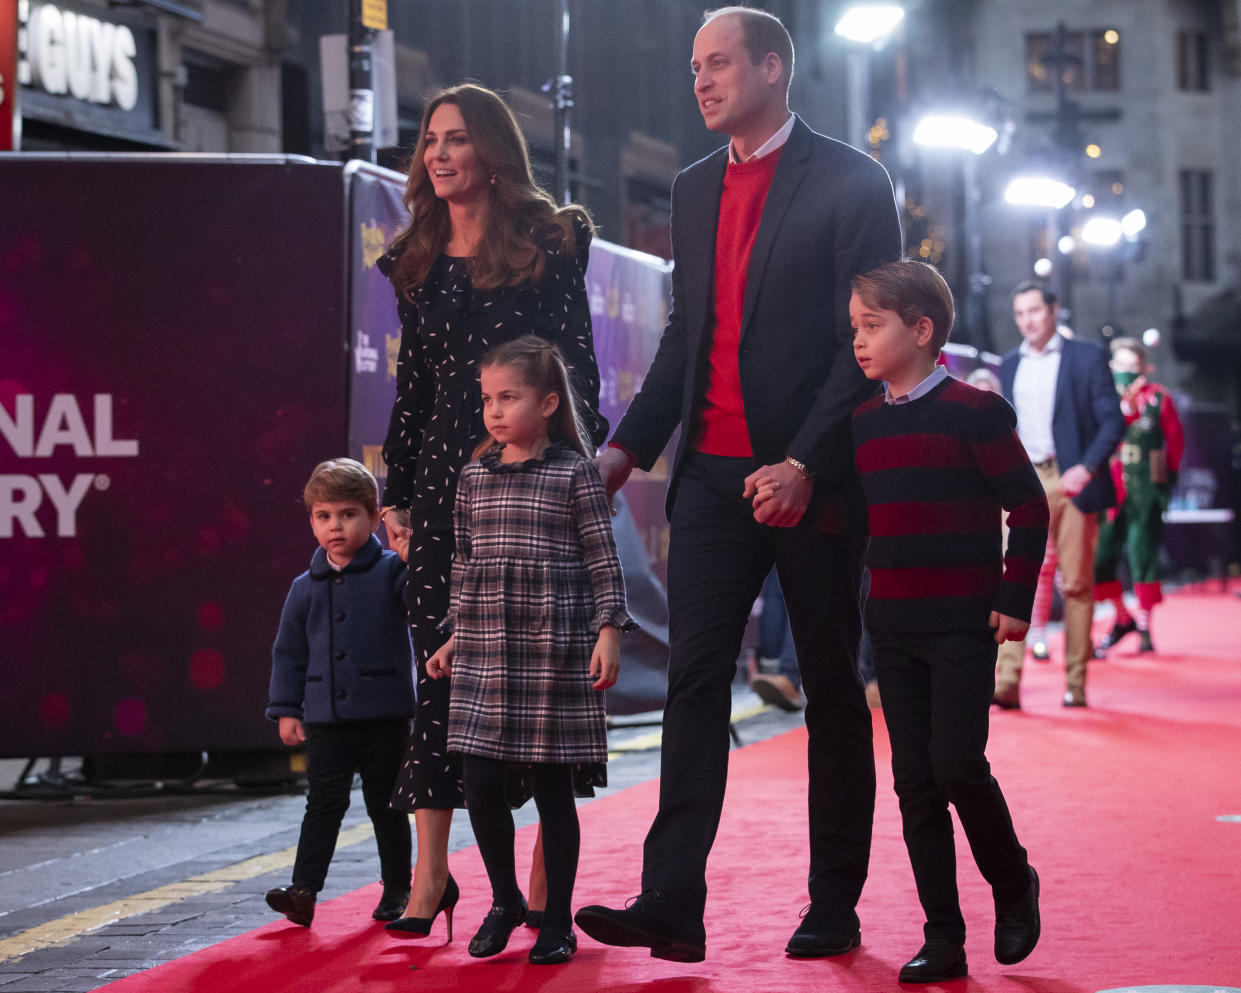 LONDON, ENGLAND - DECEMBER 11: Prince William, Duke of Cambridge and Catherine, Duchess of Cambridge with their children, Prince Louis, Princess Charlotte and Prince George, attend a special pantomime performance at London's Palladium Theatre, hosted by The National Lottery, to thank key workers and their families for their efforts throughout the pandemic on December 11, 2020 in London, England. (Photo by  Aaron Chown - WPA Pool/Getty Images)